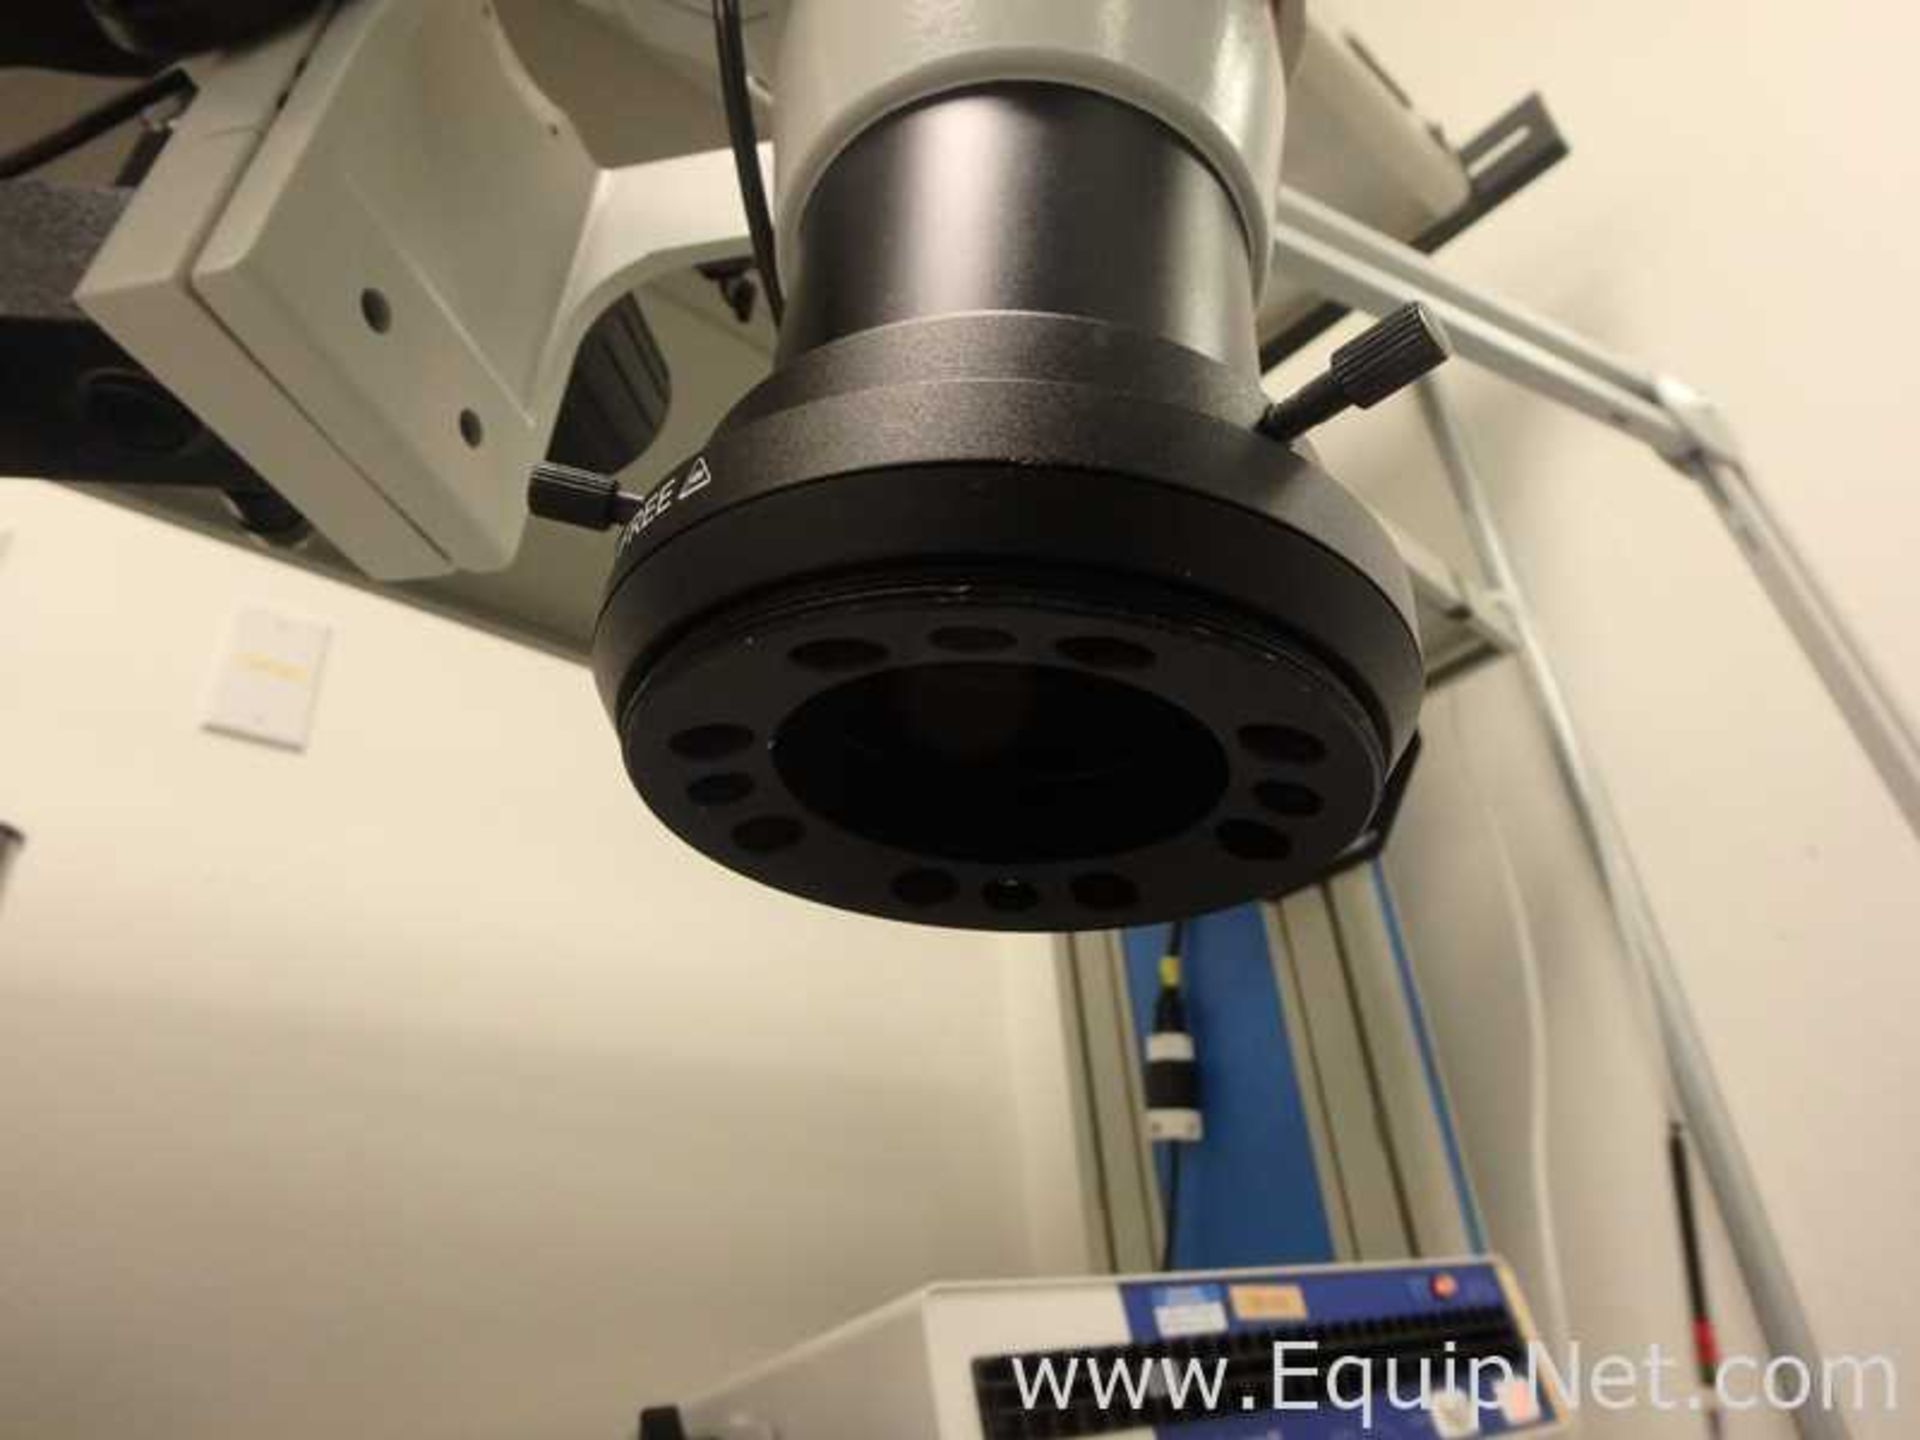 Boom Mounted Stereo Microscope - Image 9 of 10